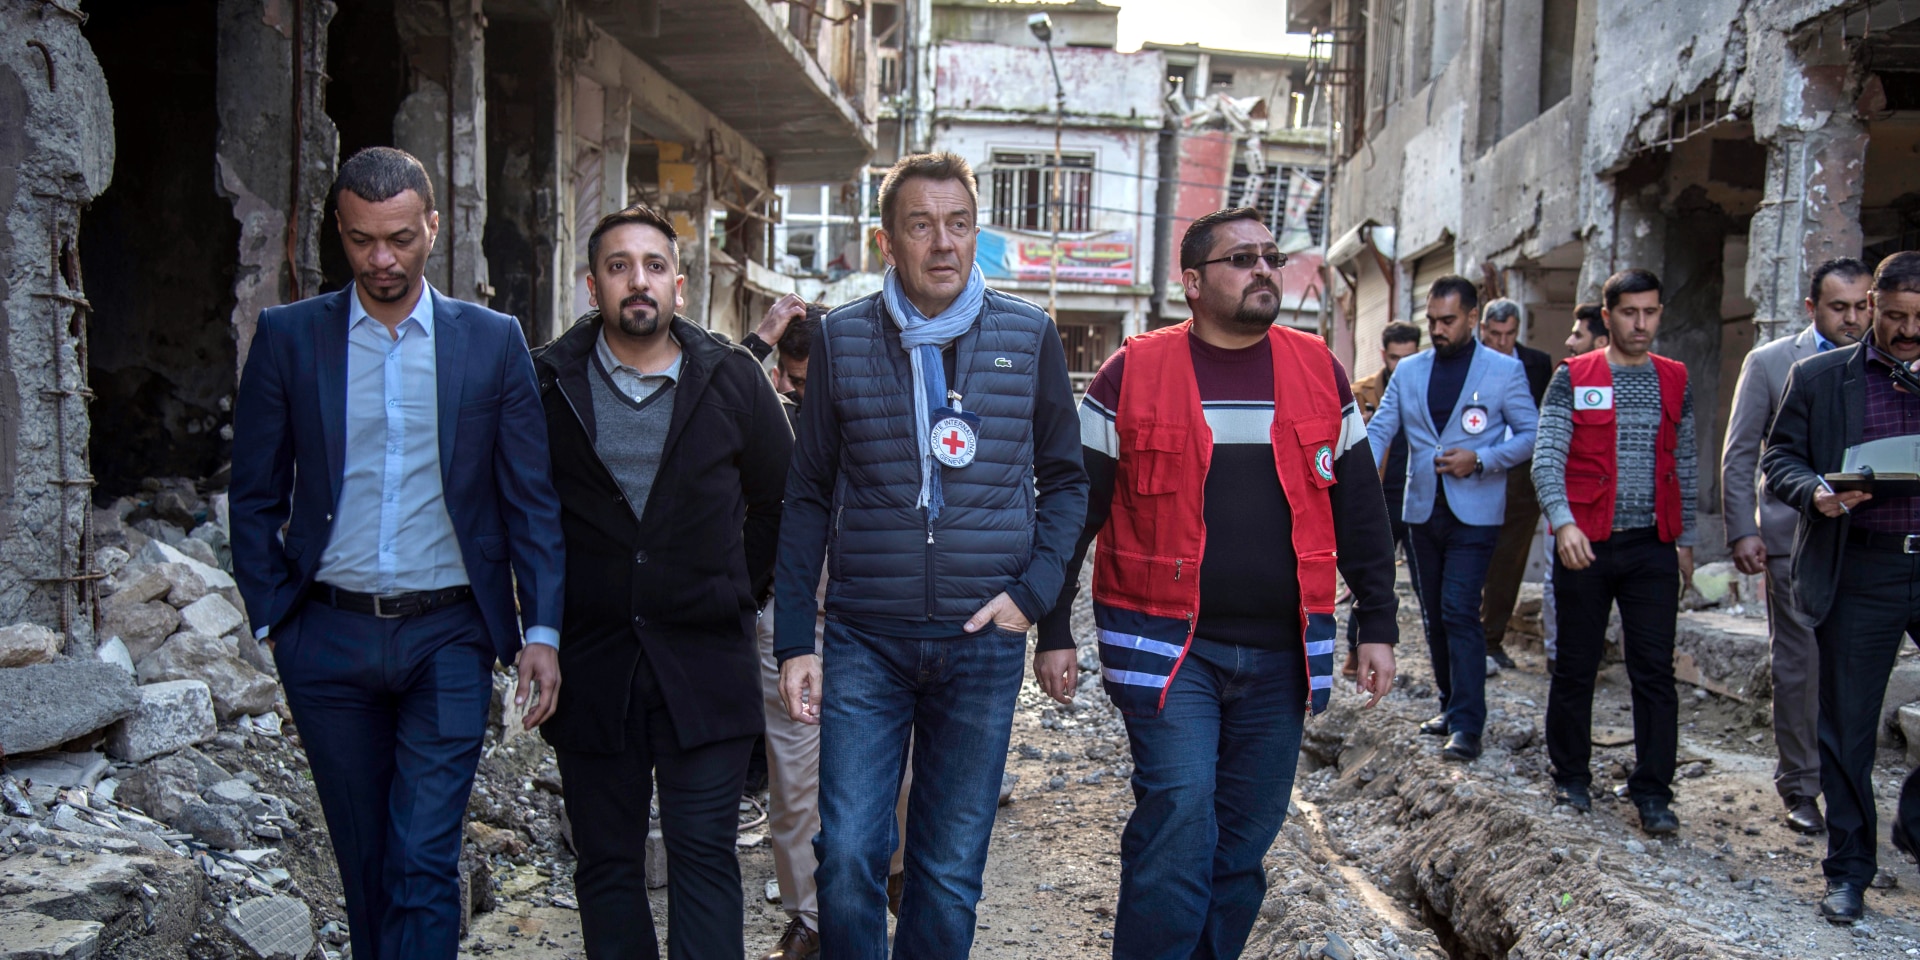 Peter Maurer, accompanied by ICRC and Red Crescent staff, makes his way through the ruins of a Mosul neighbourhood.